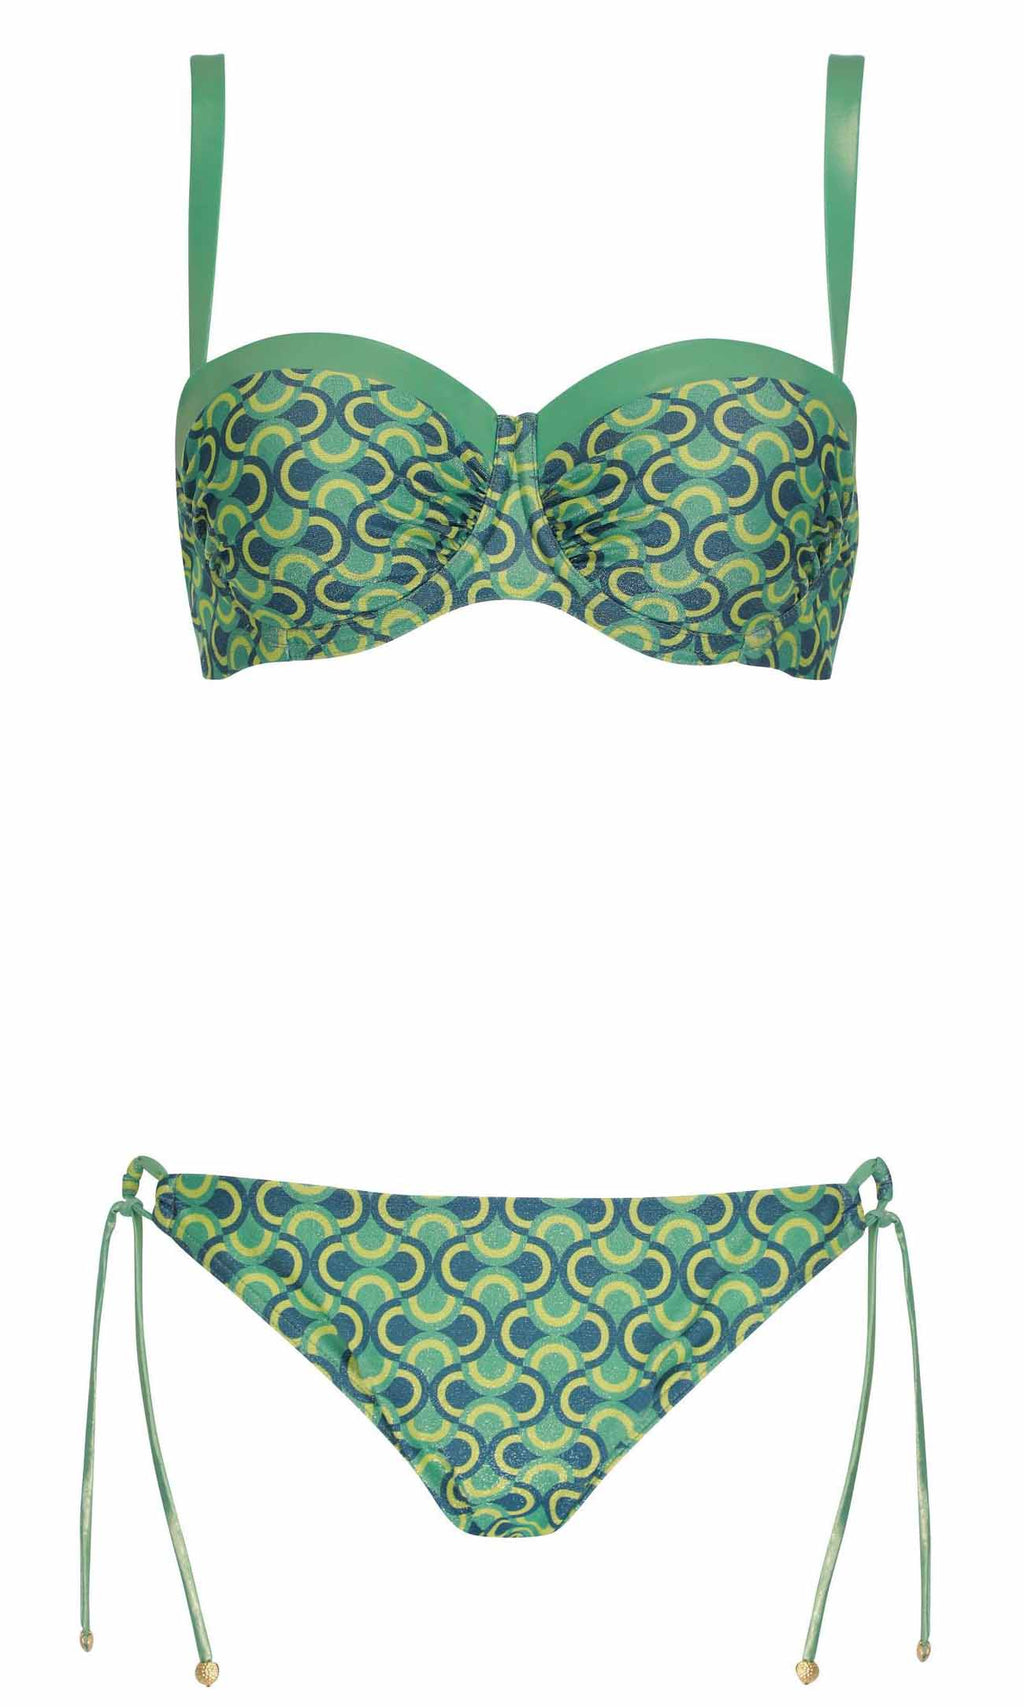 Bikini Set Limelicious. Special Order B Cup to G Cup